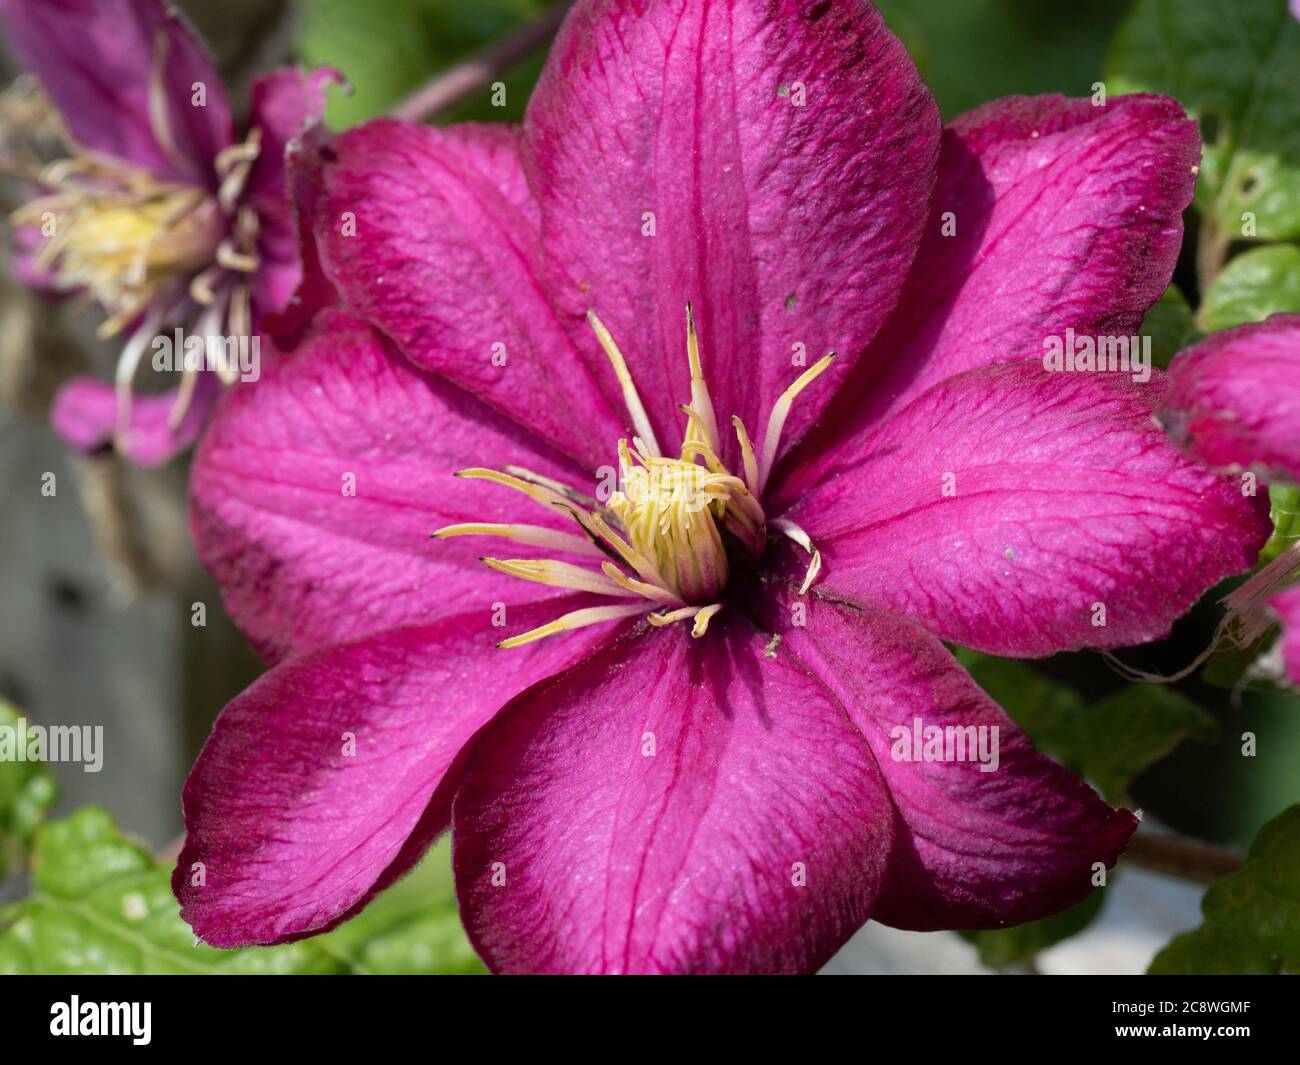 A close up of a single flower of the cherry red clematis Ville de Lyon Stock Photo